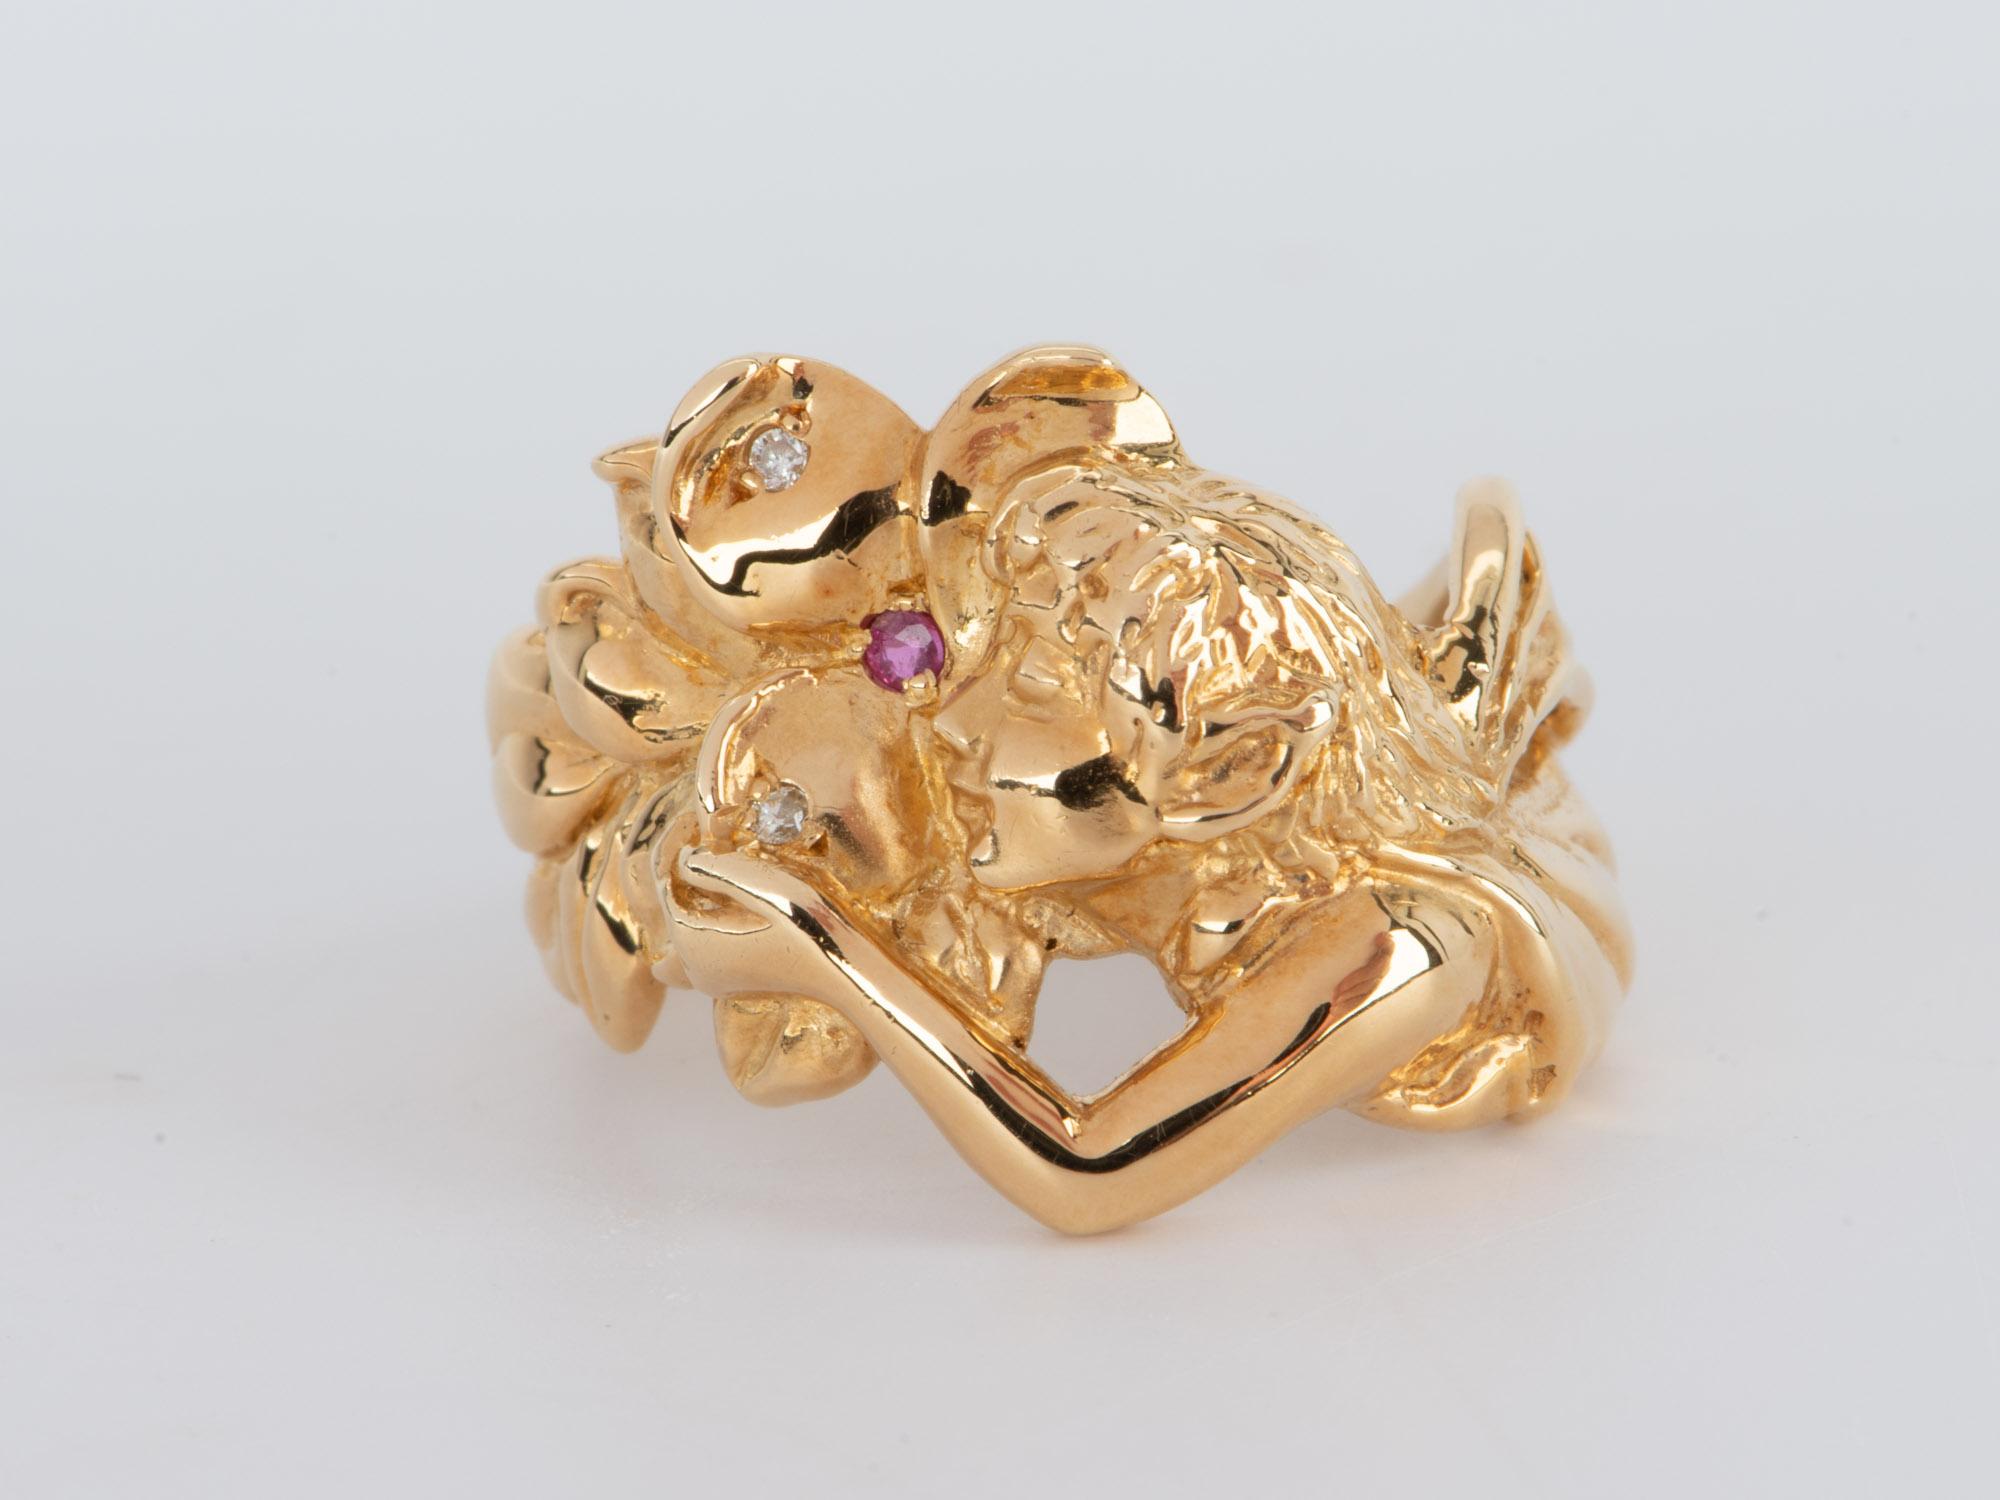   This stunning 18K gold ring is the perfect choice for any jewelry lover! With an Art Nouveau-inspired design, this elegant ring flourishes with a beautiful hair-flowing fairy and sprinkled diamonds and a single ruby. It's the perfect addition to